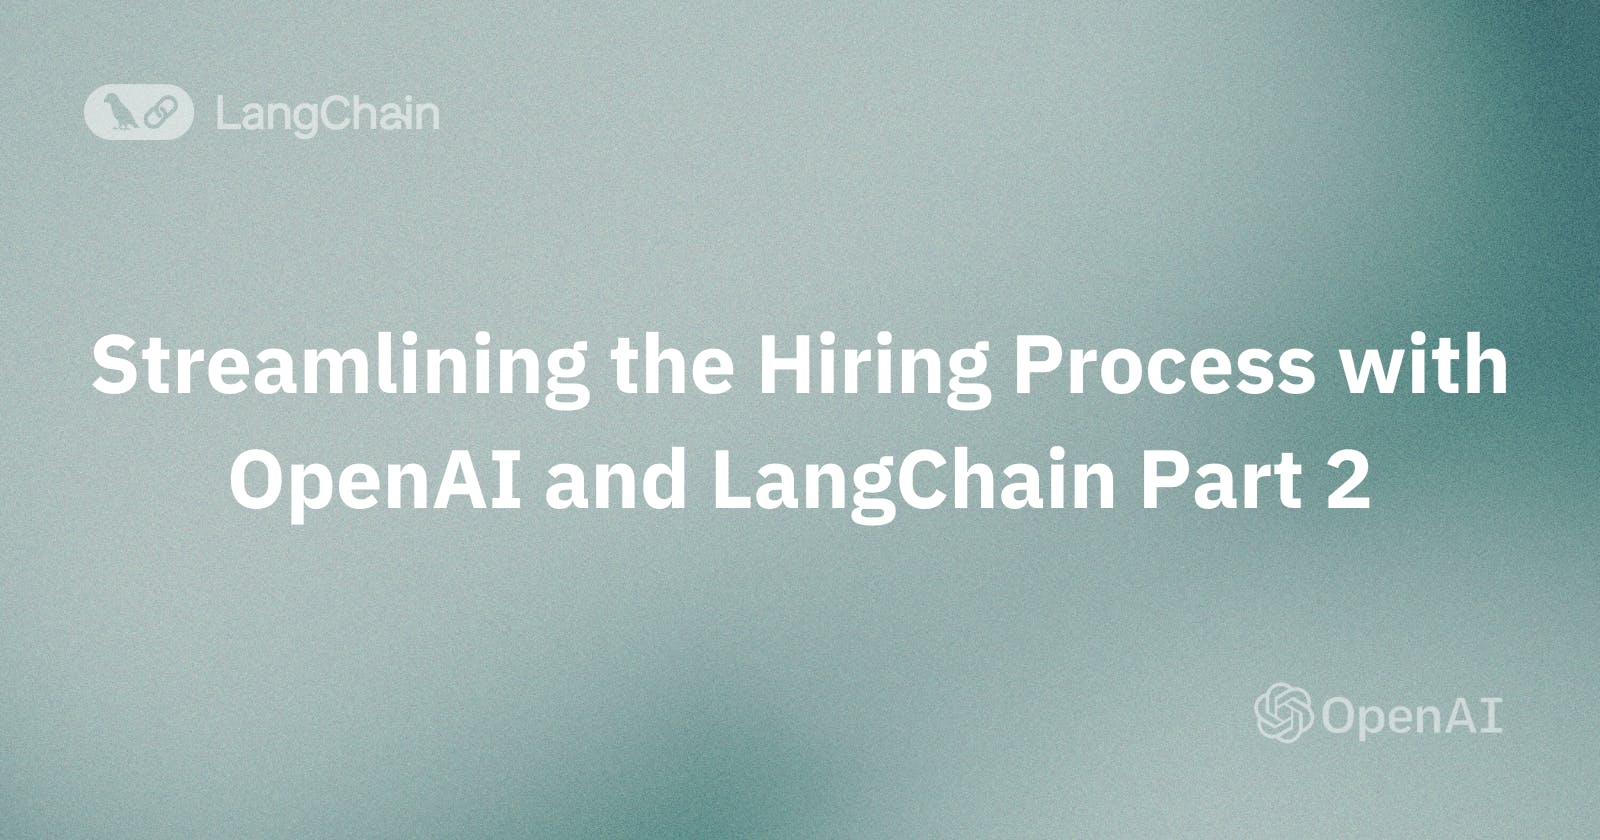 Streamlining the Hiring Process with OpenAI and LangChain Part 2